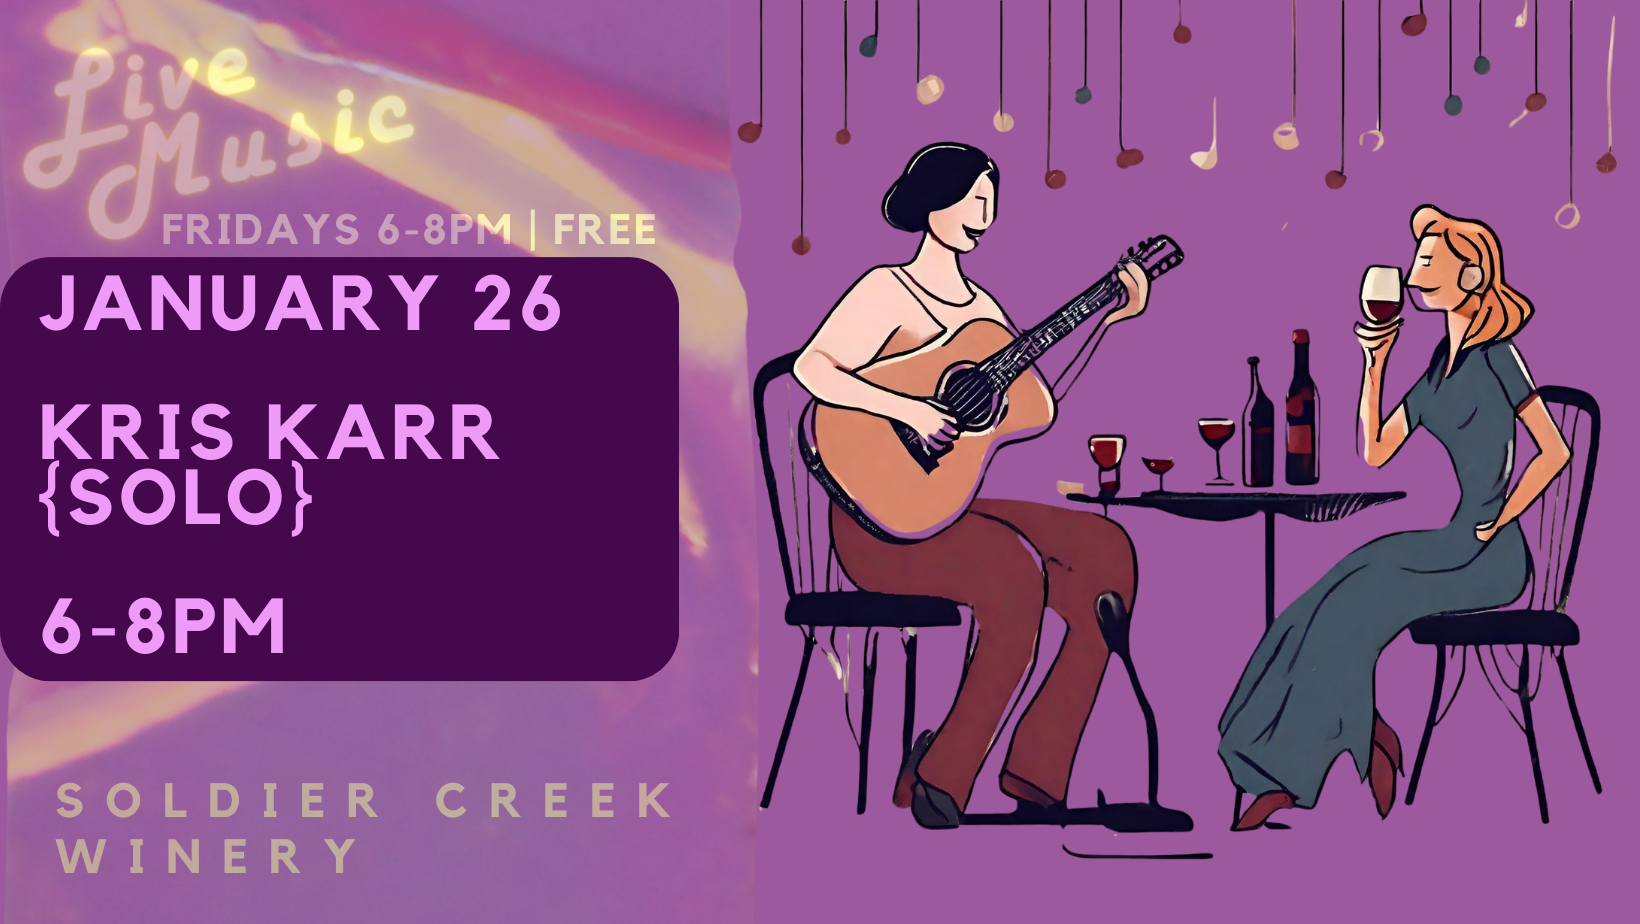 free, live music every friday at soldier creek winery. january 26 is kris karr from 6-8pm. free to listen.